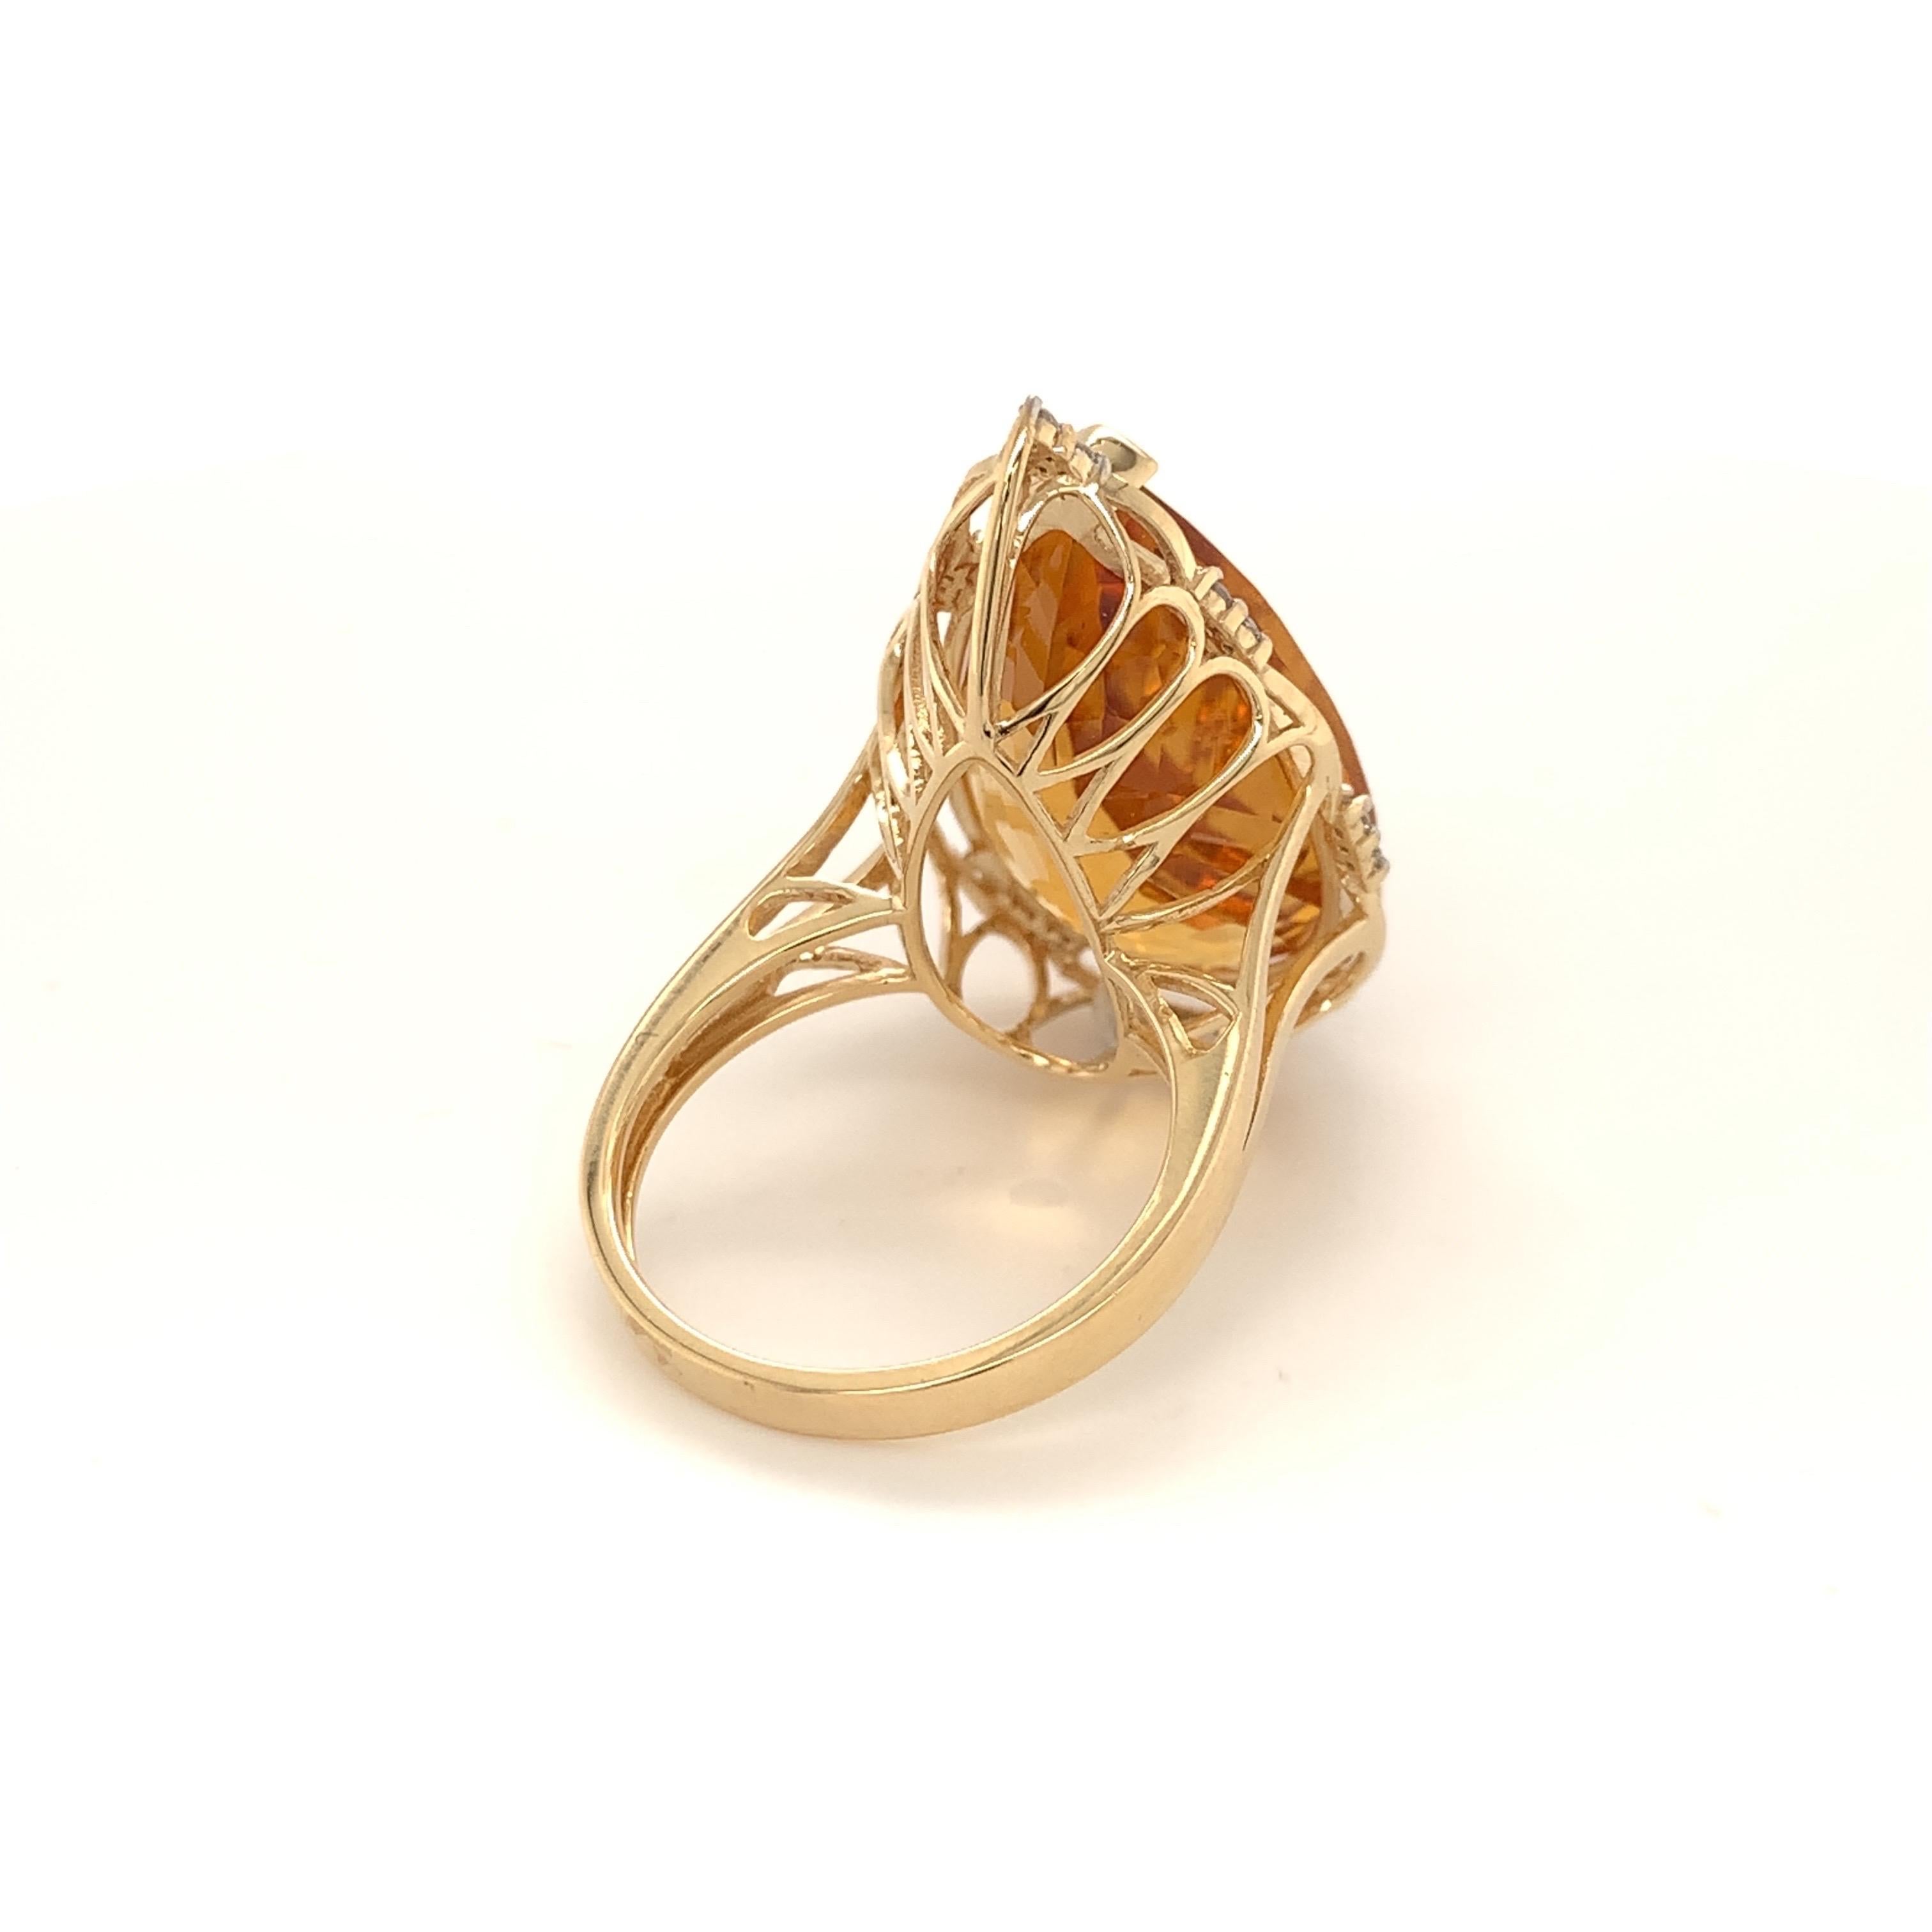 Contemporary 17.03 Carat Citrine Cocktail Ring For Sale